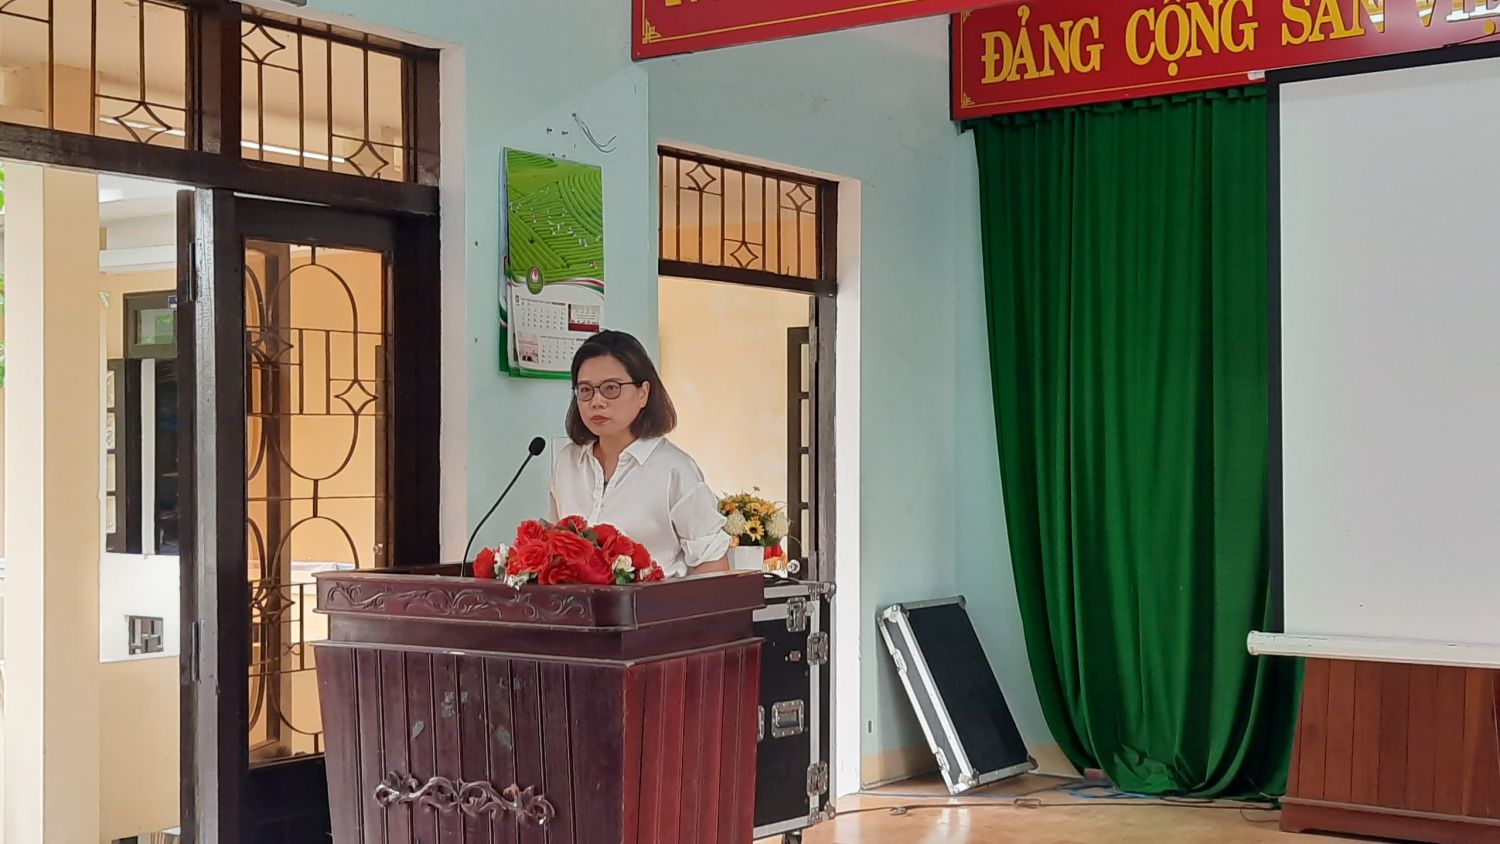 Ms. Bui Thi Thu Hien - IUCN Marine and Coastal Coordinator presented at the review meeting